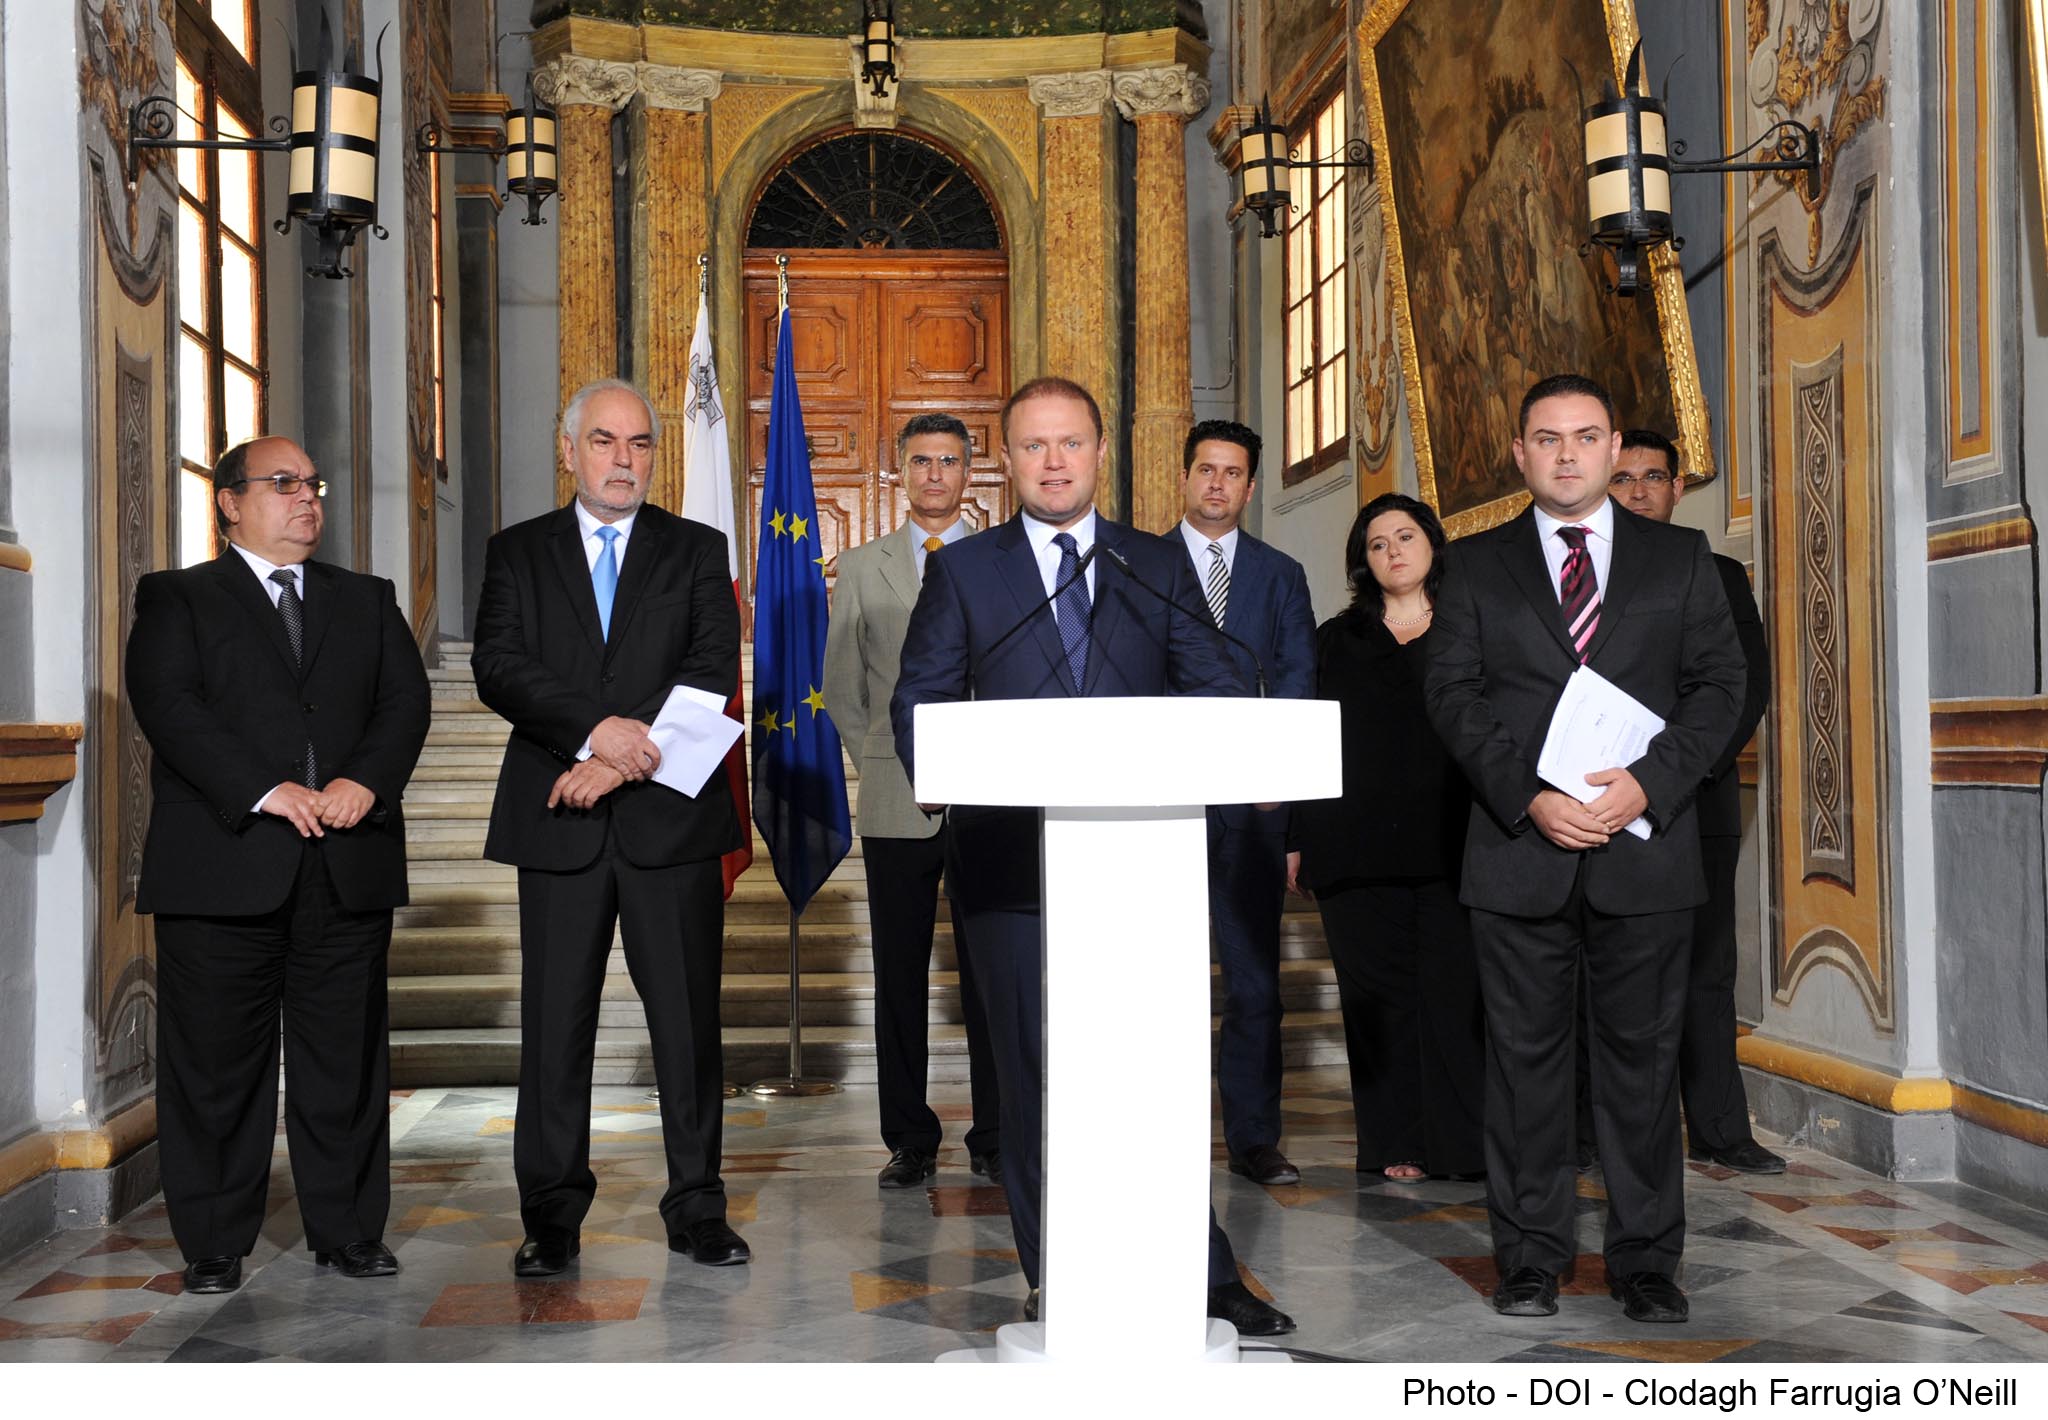 Are they addressing the nation on Malta's entry into World War III? No, they're announcing the lifting of the statute of limitations on crimes involving corruption and politicians.